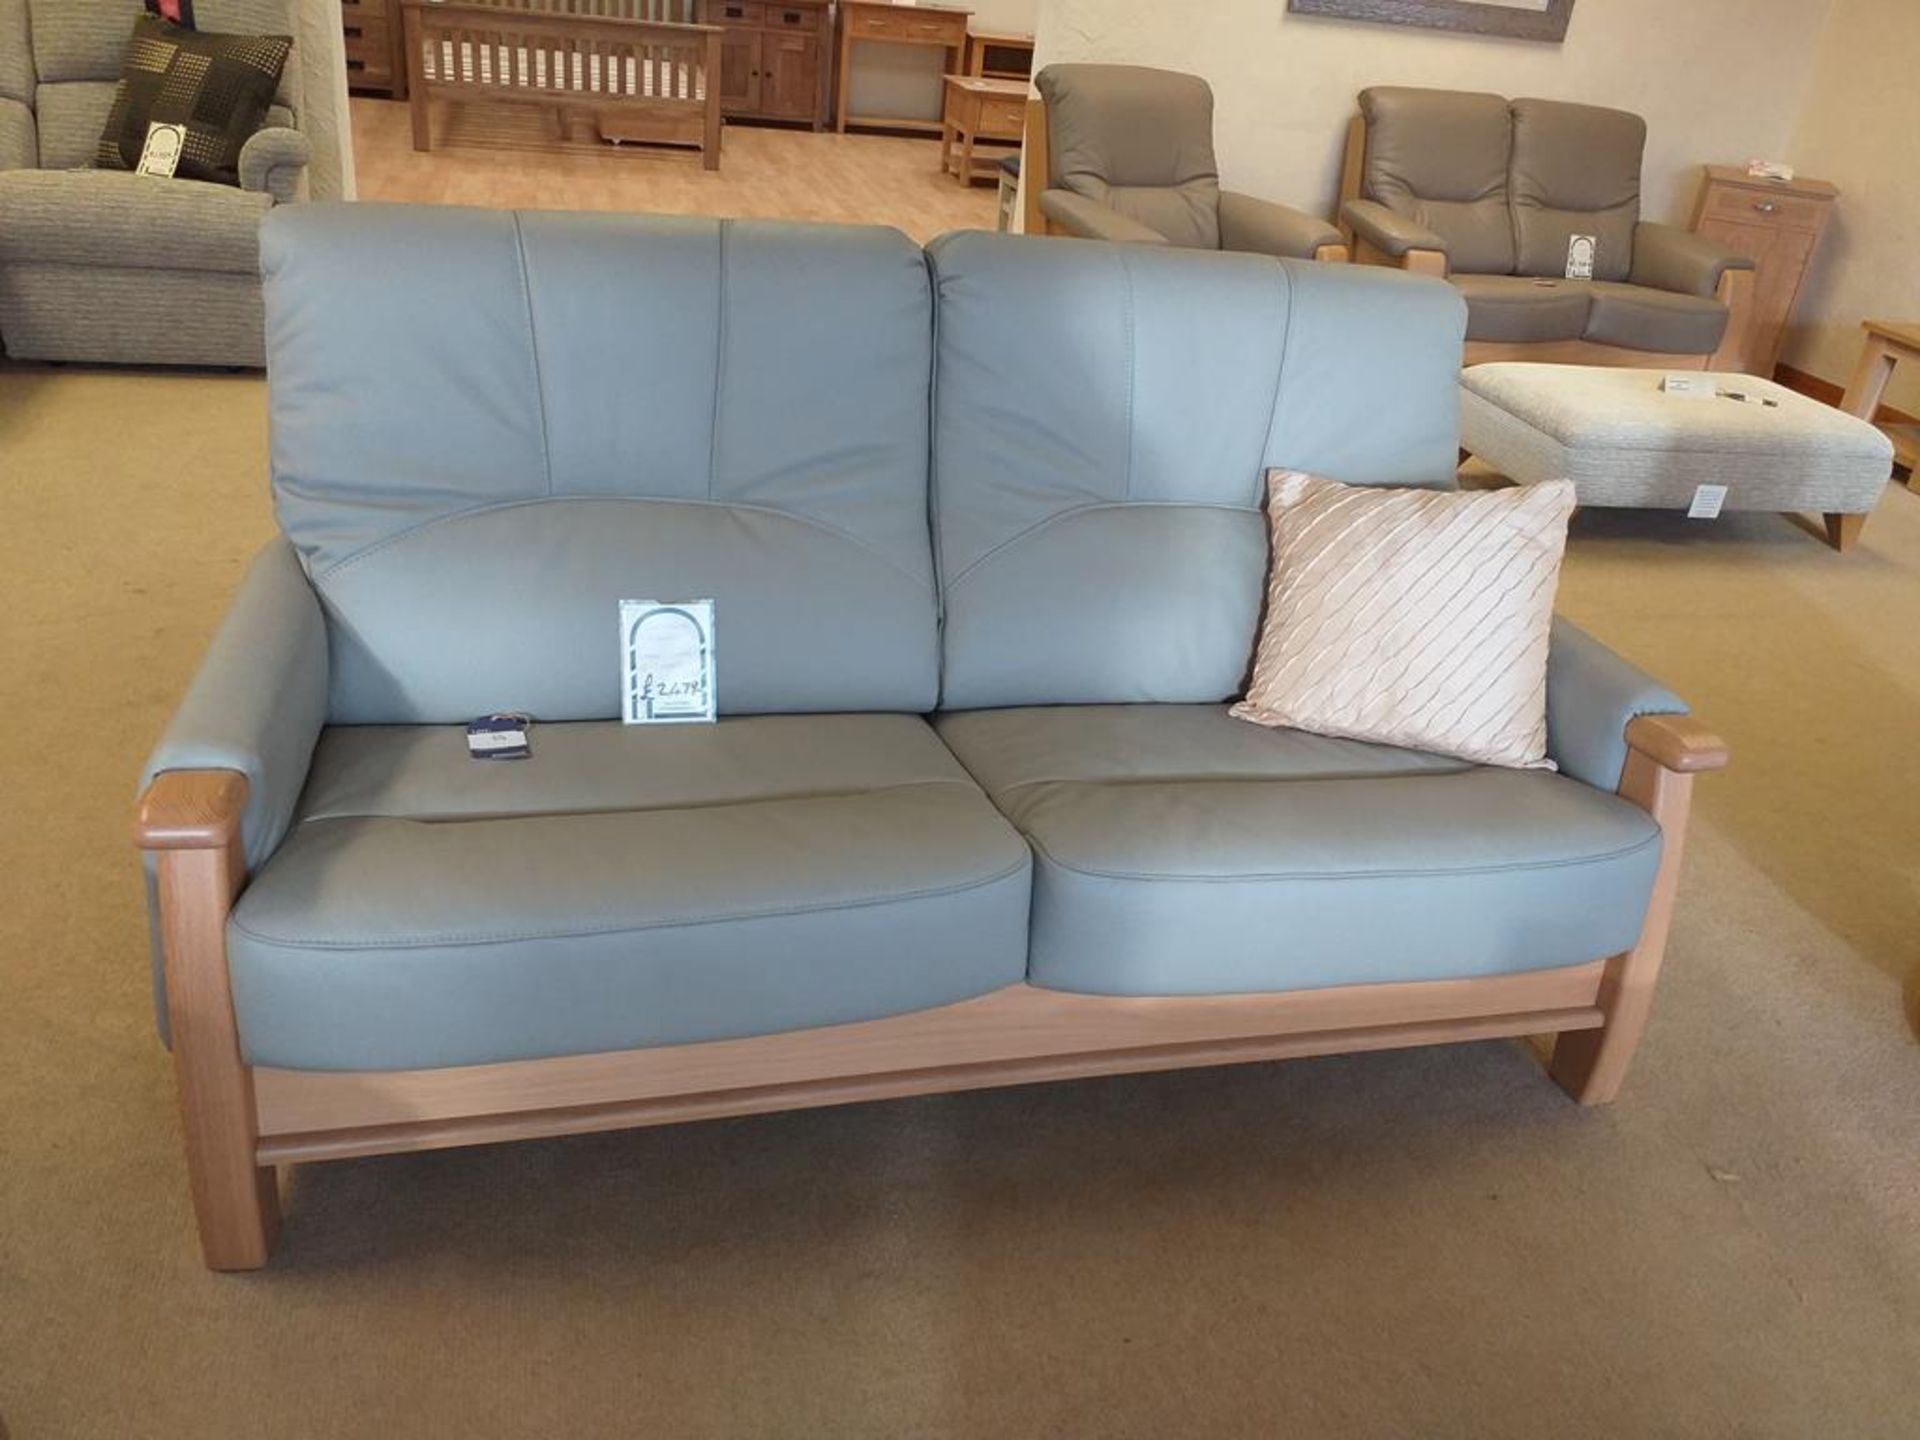 Recor Lincoln Large Sofa and Armchair - Image 3 of 6